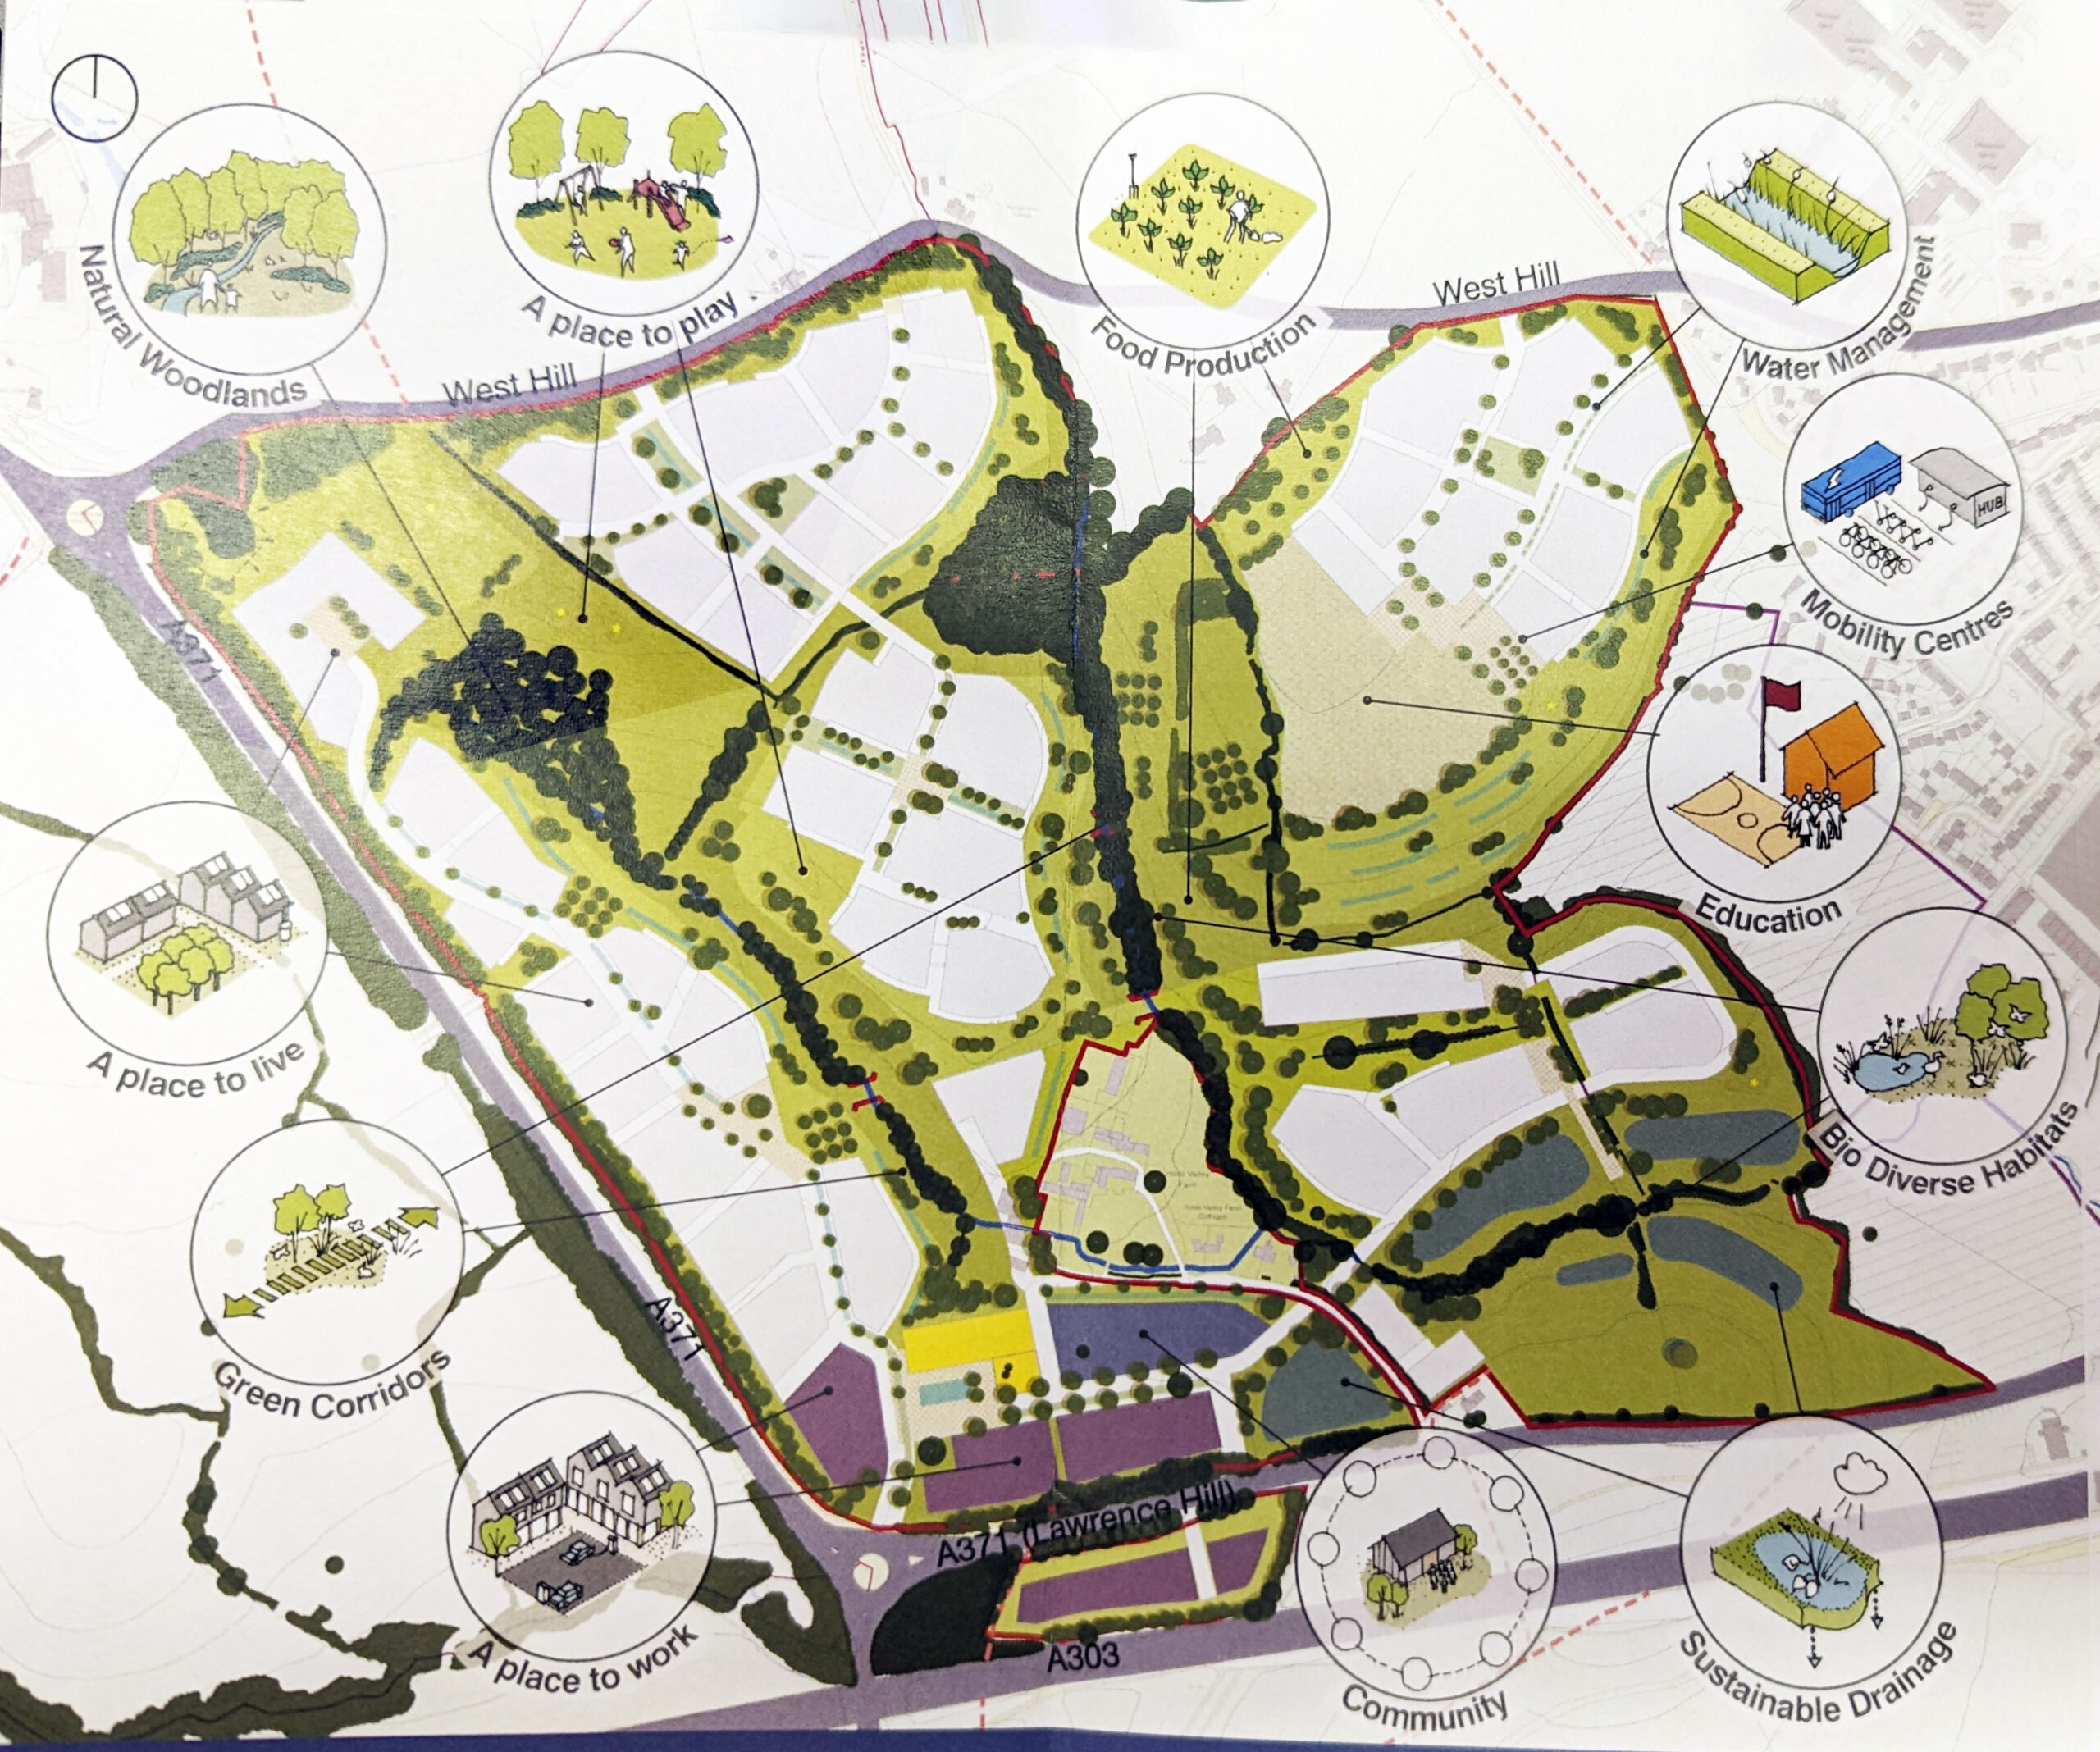 A drawing from the leaflet giving an indication of how the West Wincanton development could look. Picture: LVA